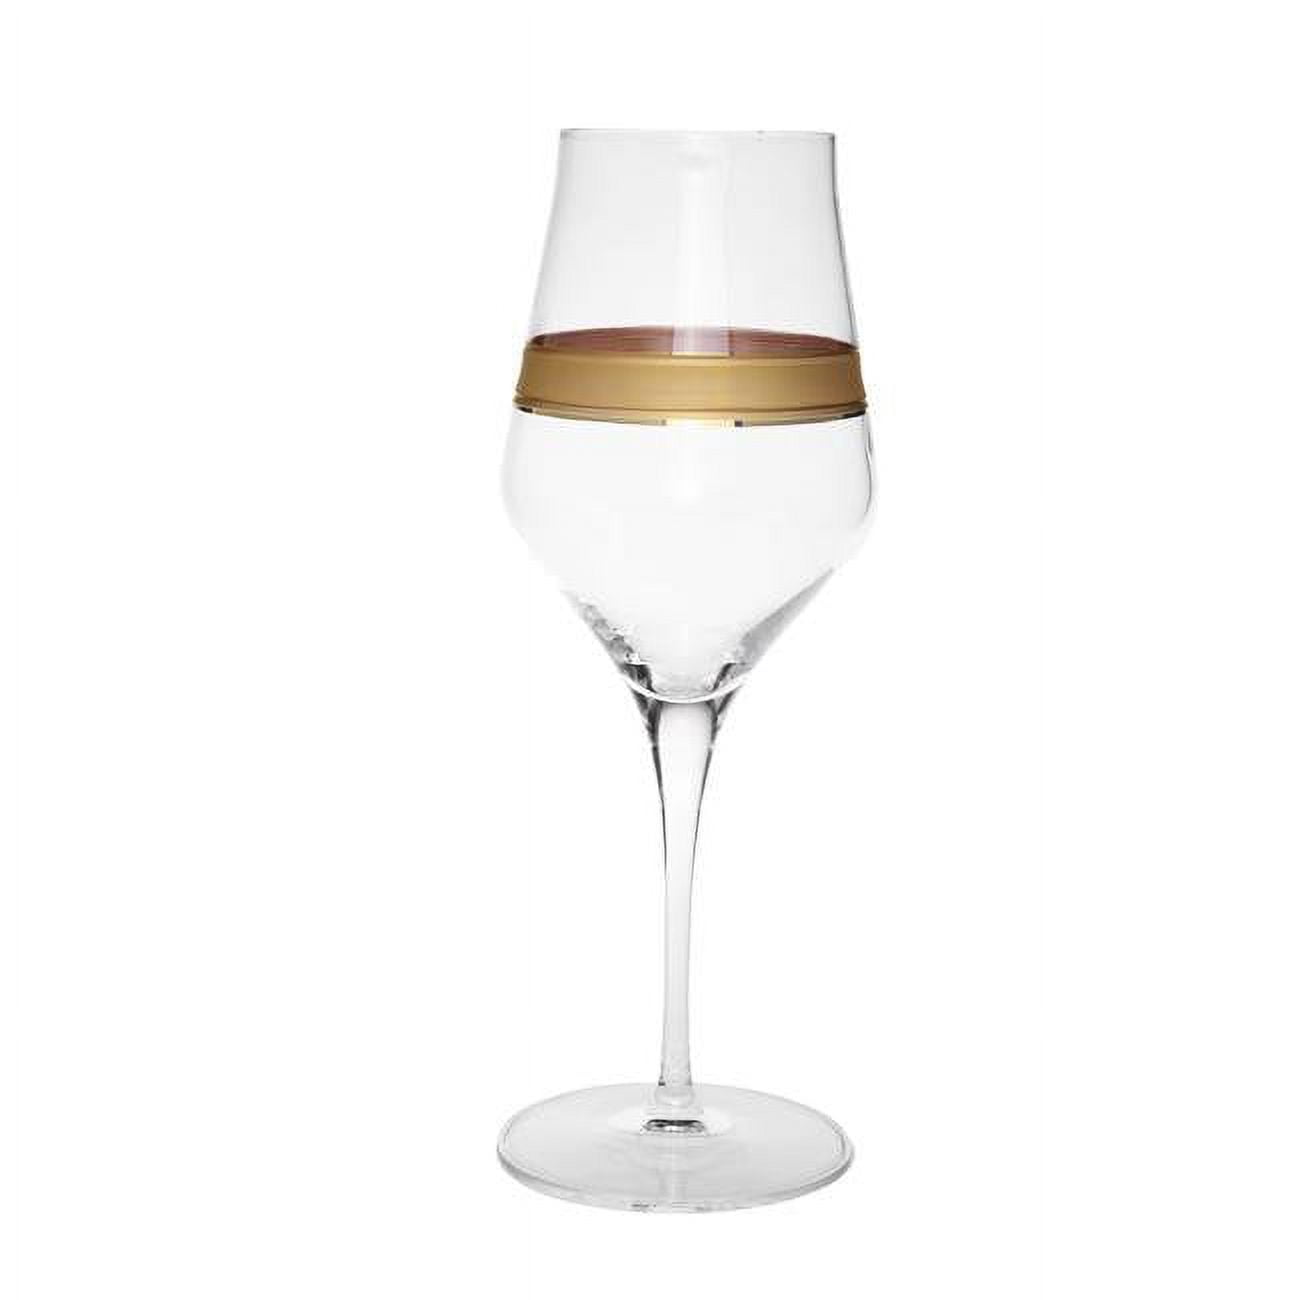 Picture of Classic Touch CWG736 Water Glasses with 14K Gold Striped Design, Set of 6 - 3.5 x 8 in.